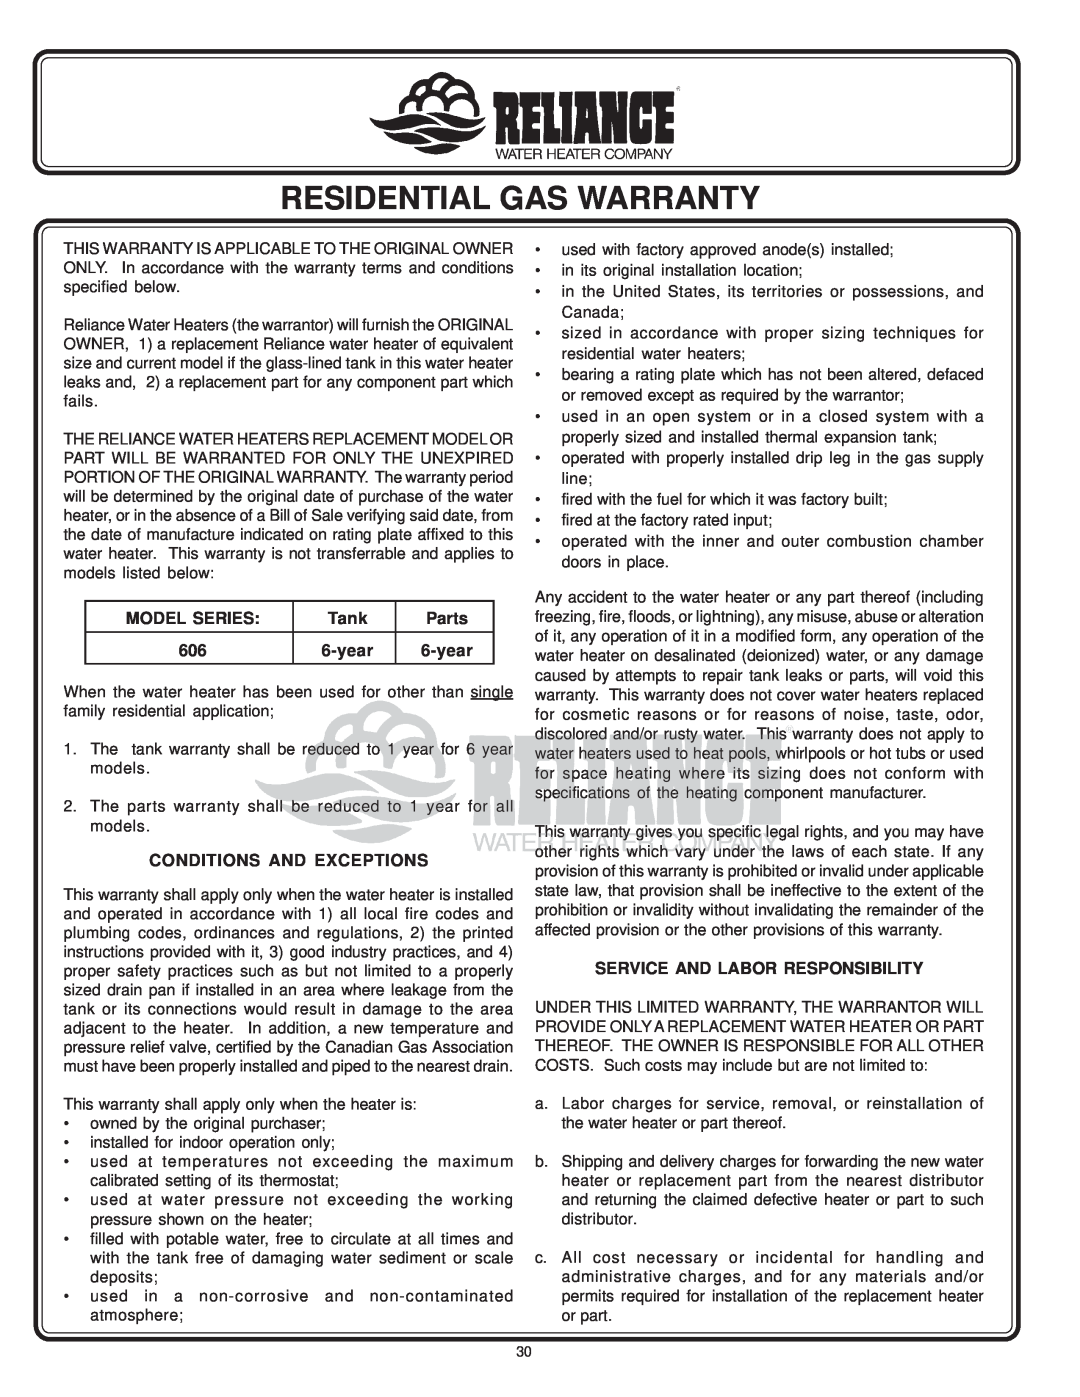 Reliance Water Heaters 196296-001 Residential Gas Warranty, Model Series, Tank, Parts, year, Conditions And Exceptions 